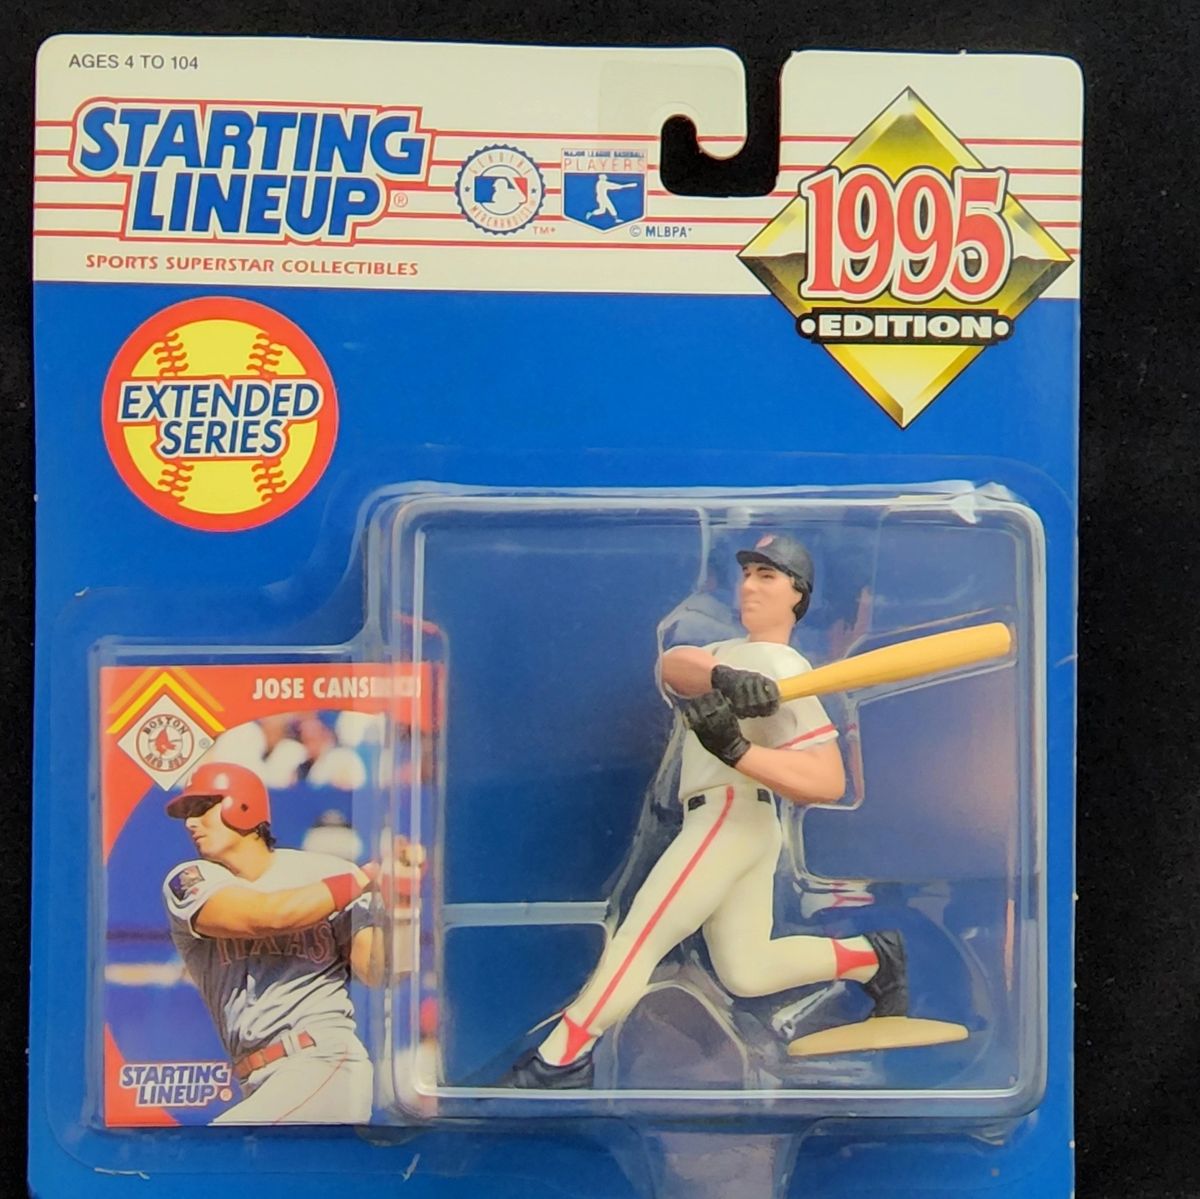 Jose Canseco 1995 Starting Lineup